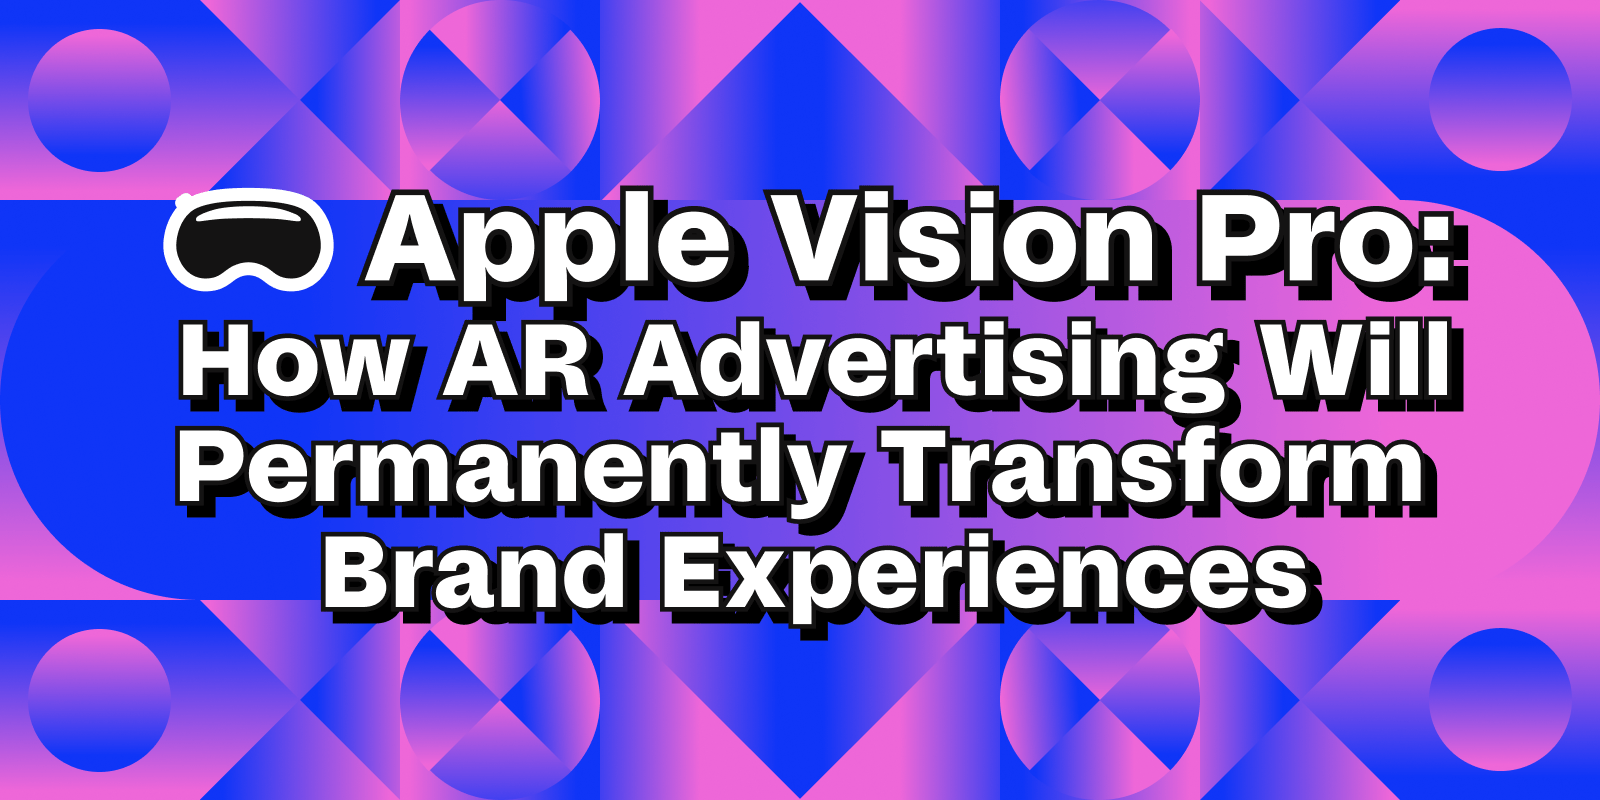 Apple Vision Pro" How AR Advertising Will Permanently Transform Brand Experiences